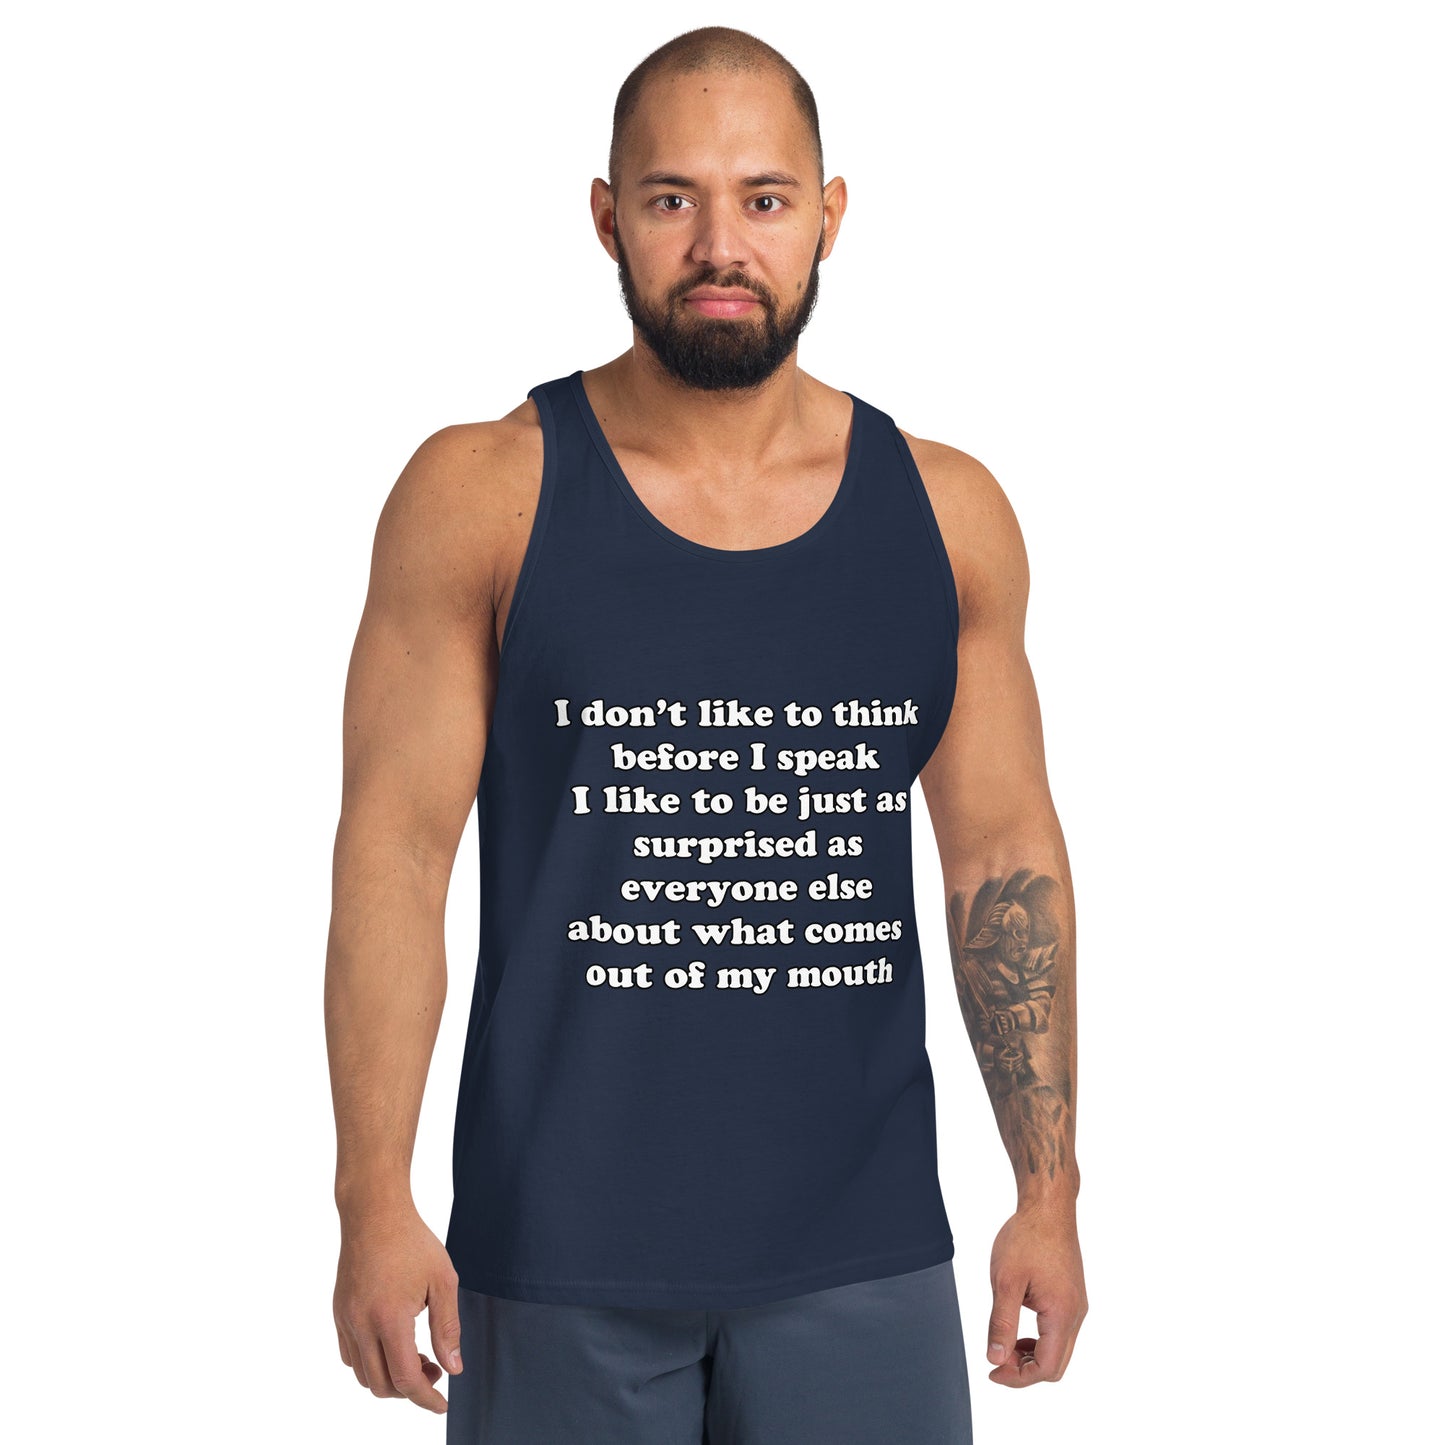 Man with navy blue tank top with text “I don't think before I speak Just as serprised as everyone about what comes out of my mouth"